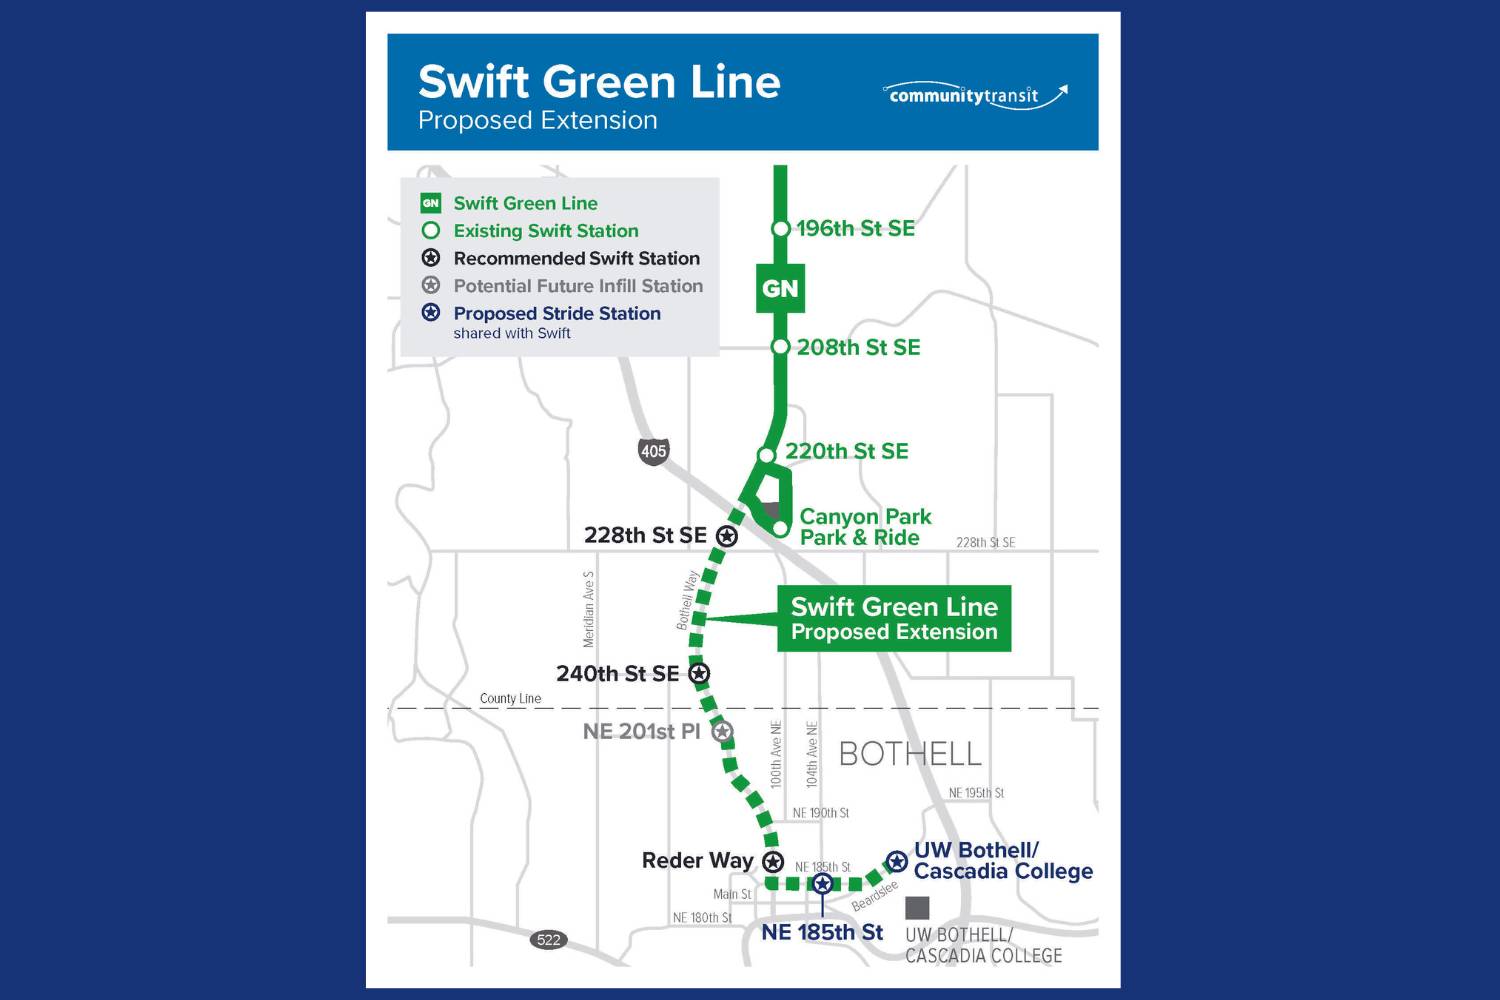 Map showing Swift Green Line Extensions